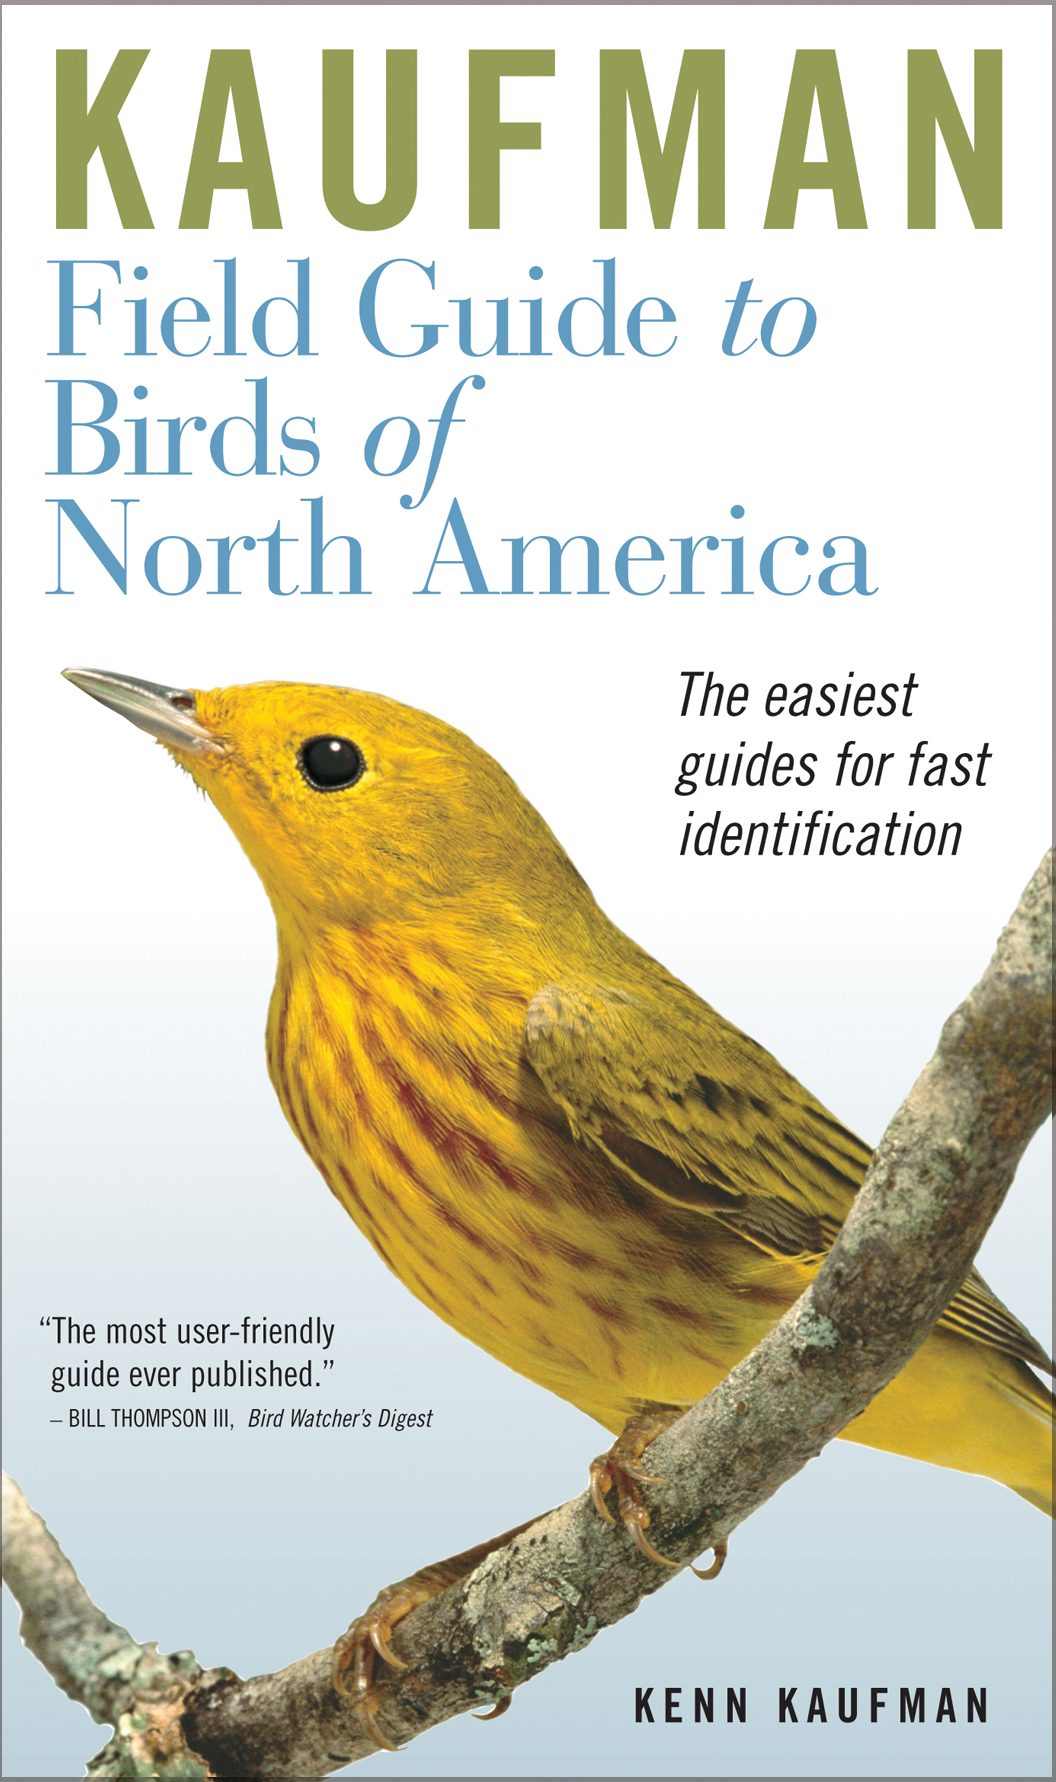 Book of North American Birds  Book by Editors of Reader's Digest